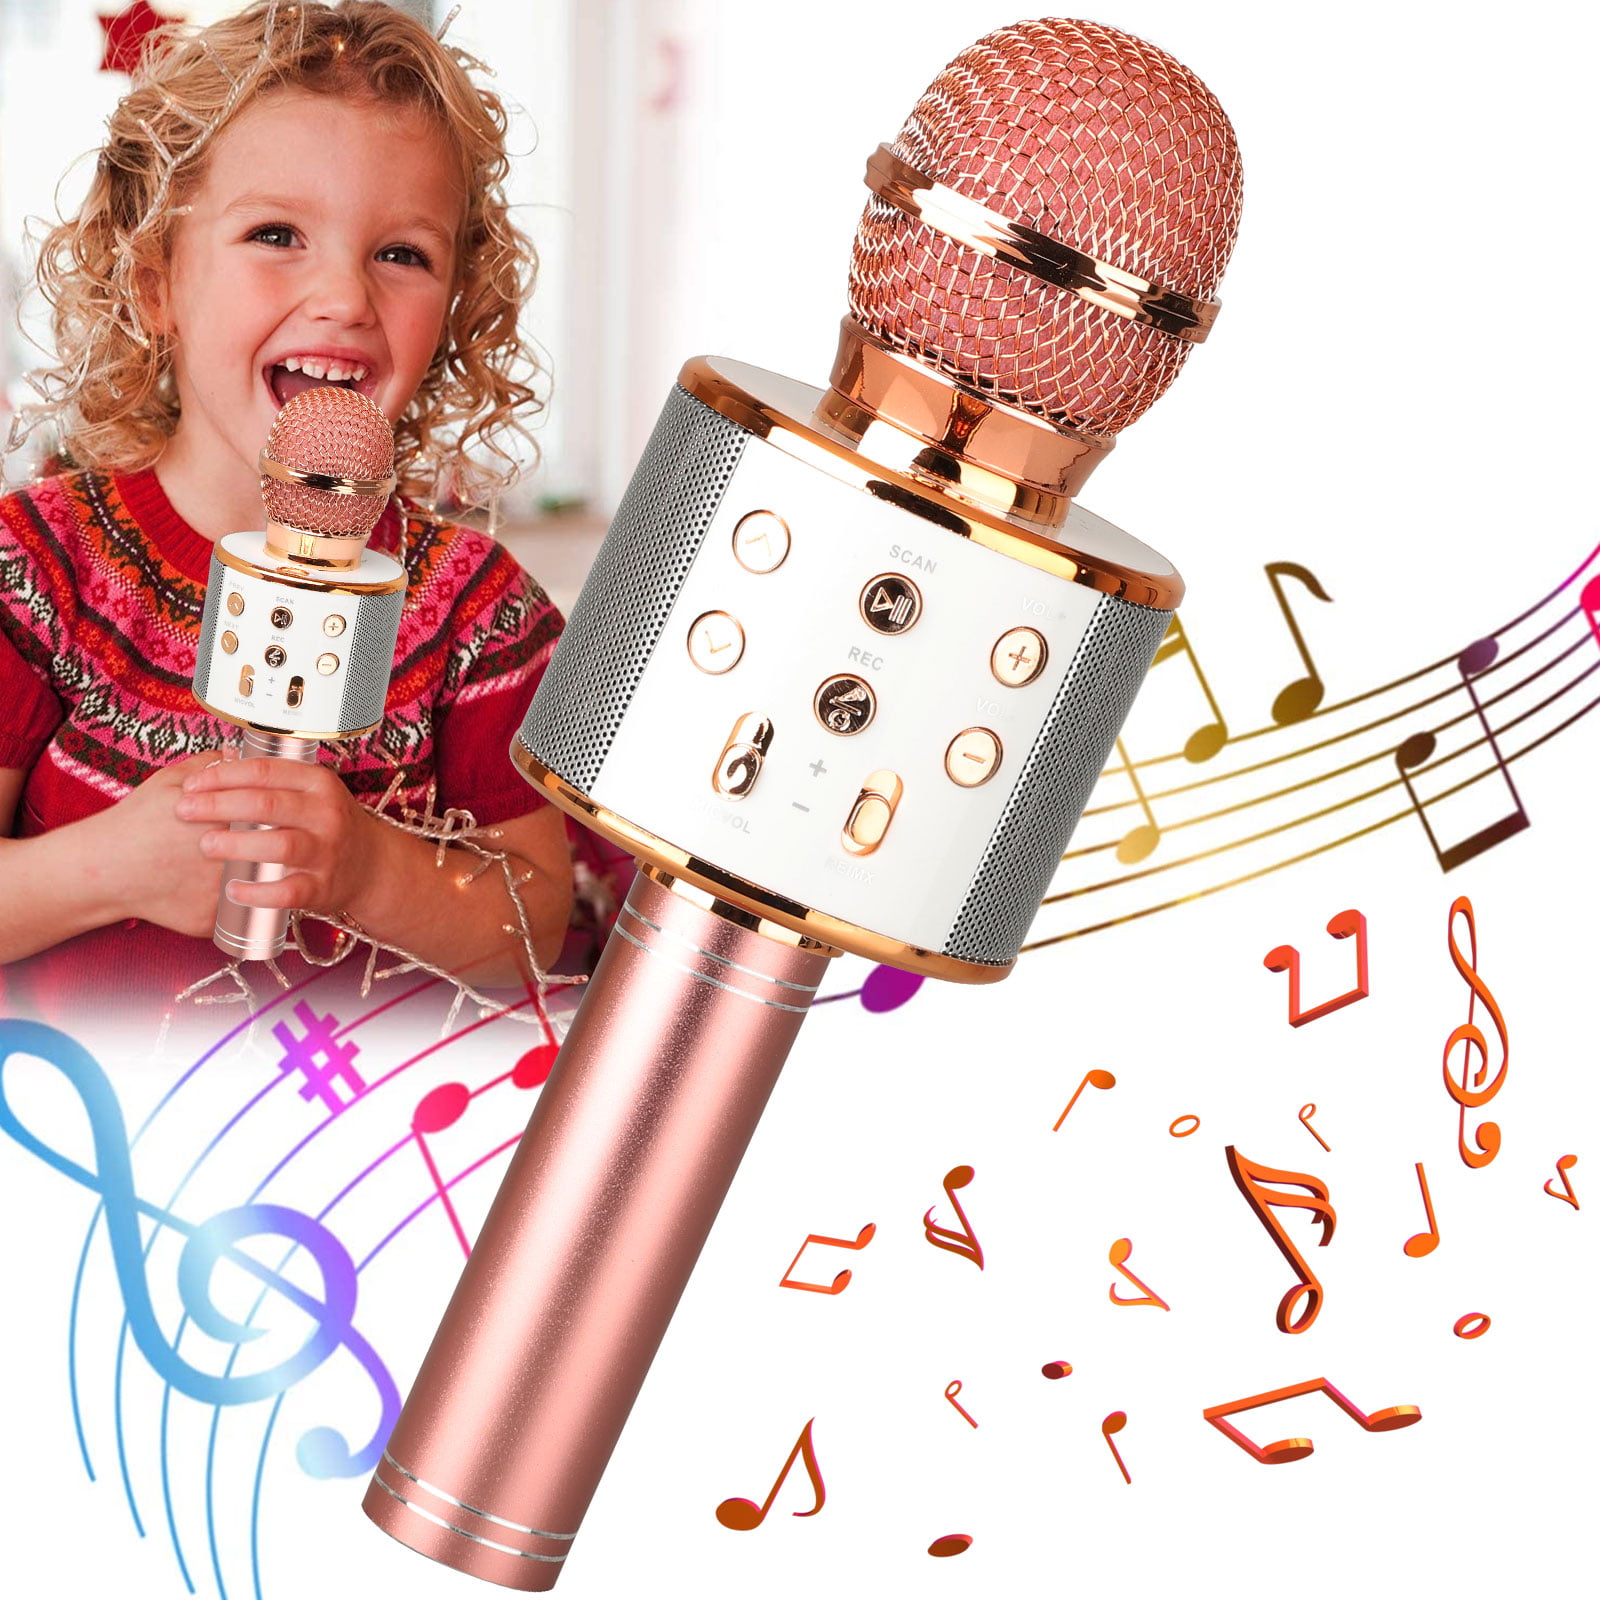 CYY 2Pack Bluetooth Wireless Karaoke Microphone for Kids&Adults,Toy Microphone for Toddlers,Portable Cordless Karaoke Speaker for Girls&Boys,Birthday and Festival Gifts to Party or Outdoor Activity 